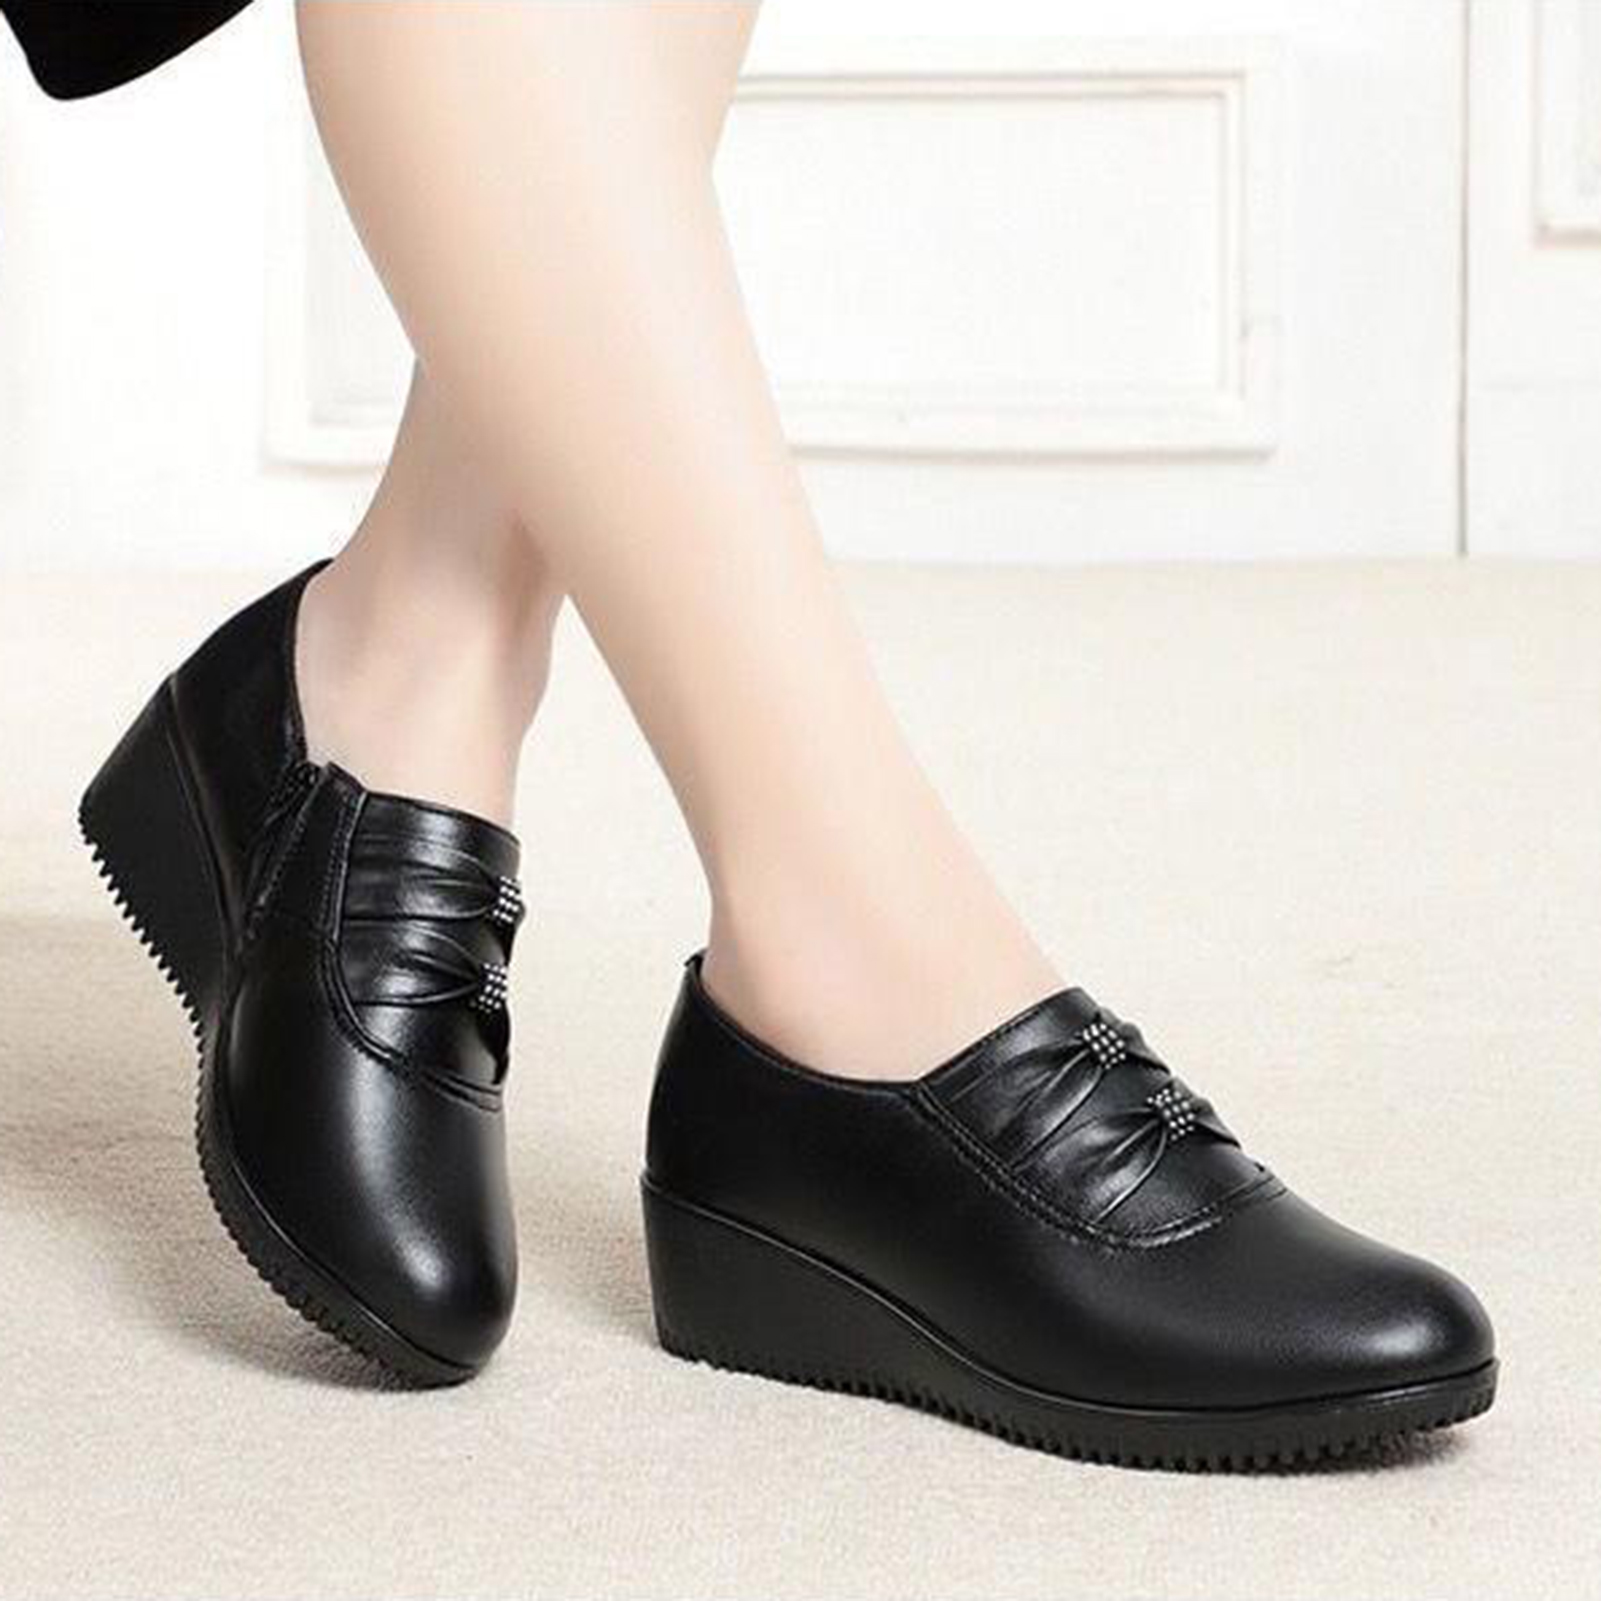 Women High Heels Wedges Shoes Breathable Solid Color Shoes Gift for